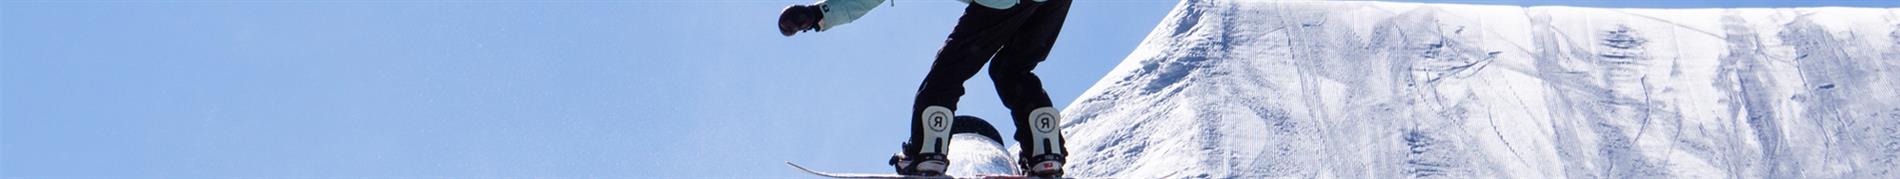 Spyder Women's Snowboard Pants: Warm, Waterproof and Awesome 